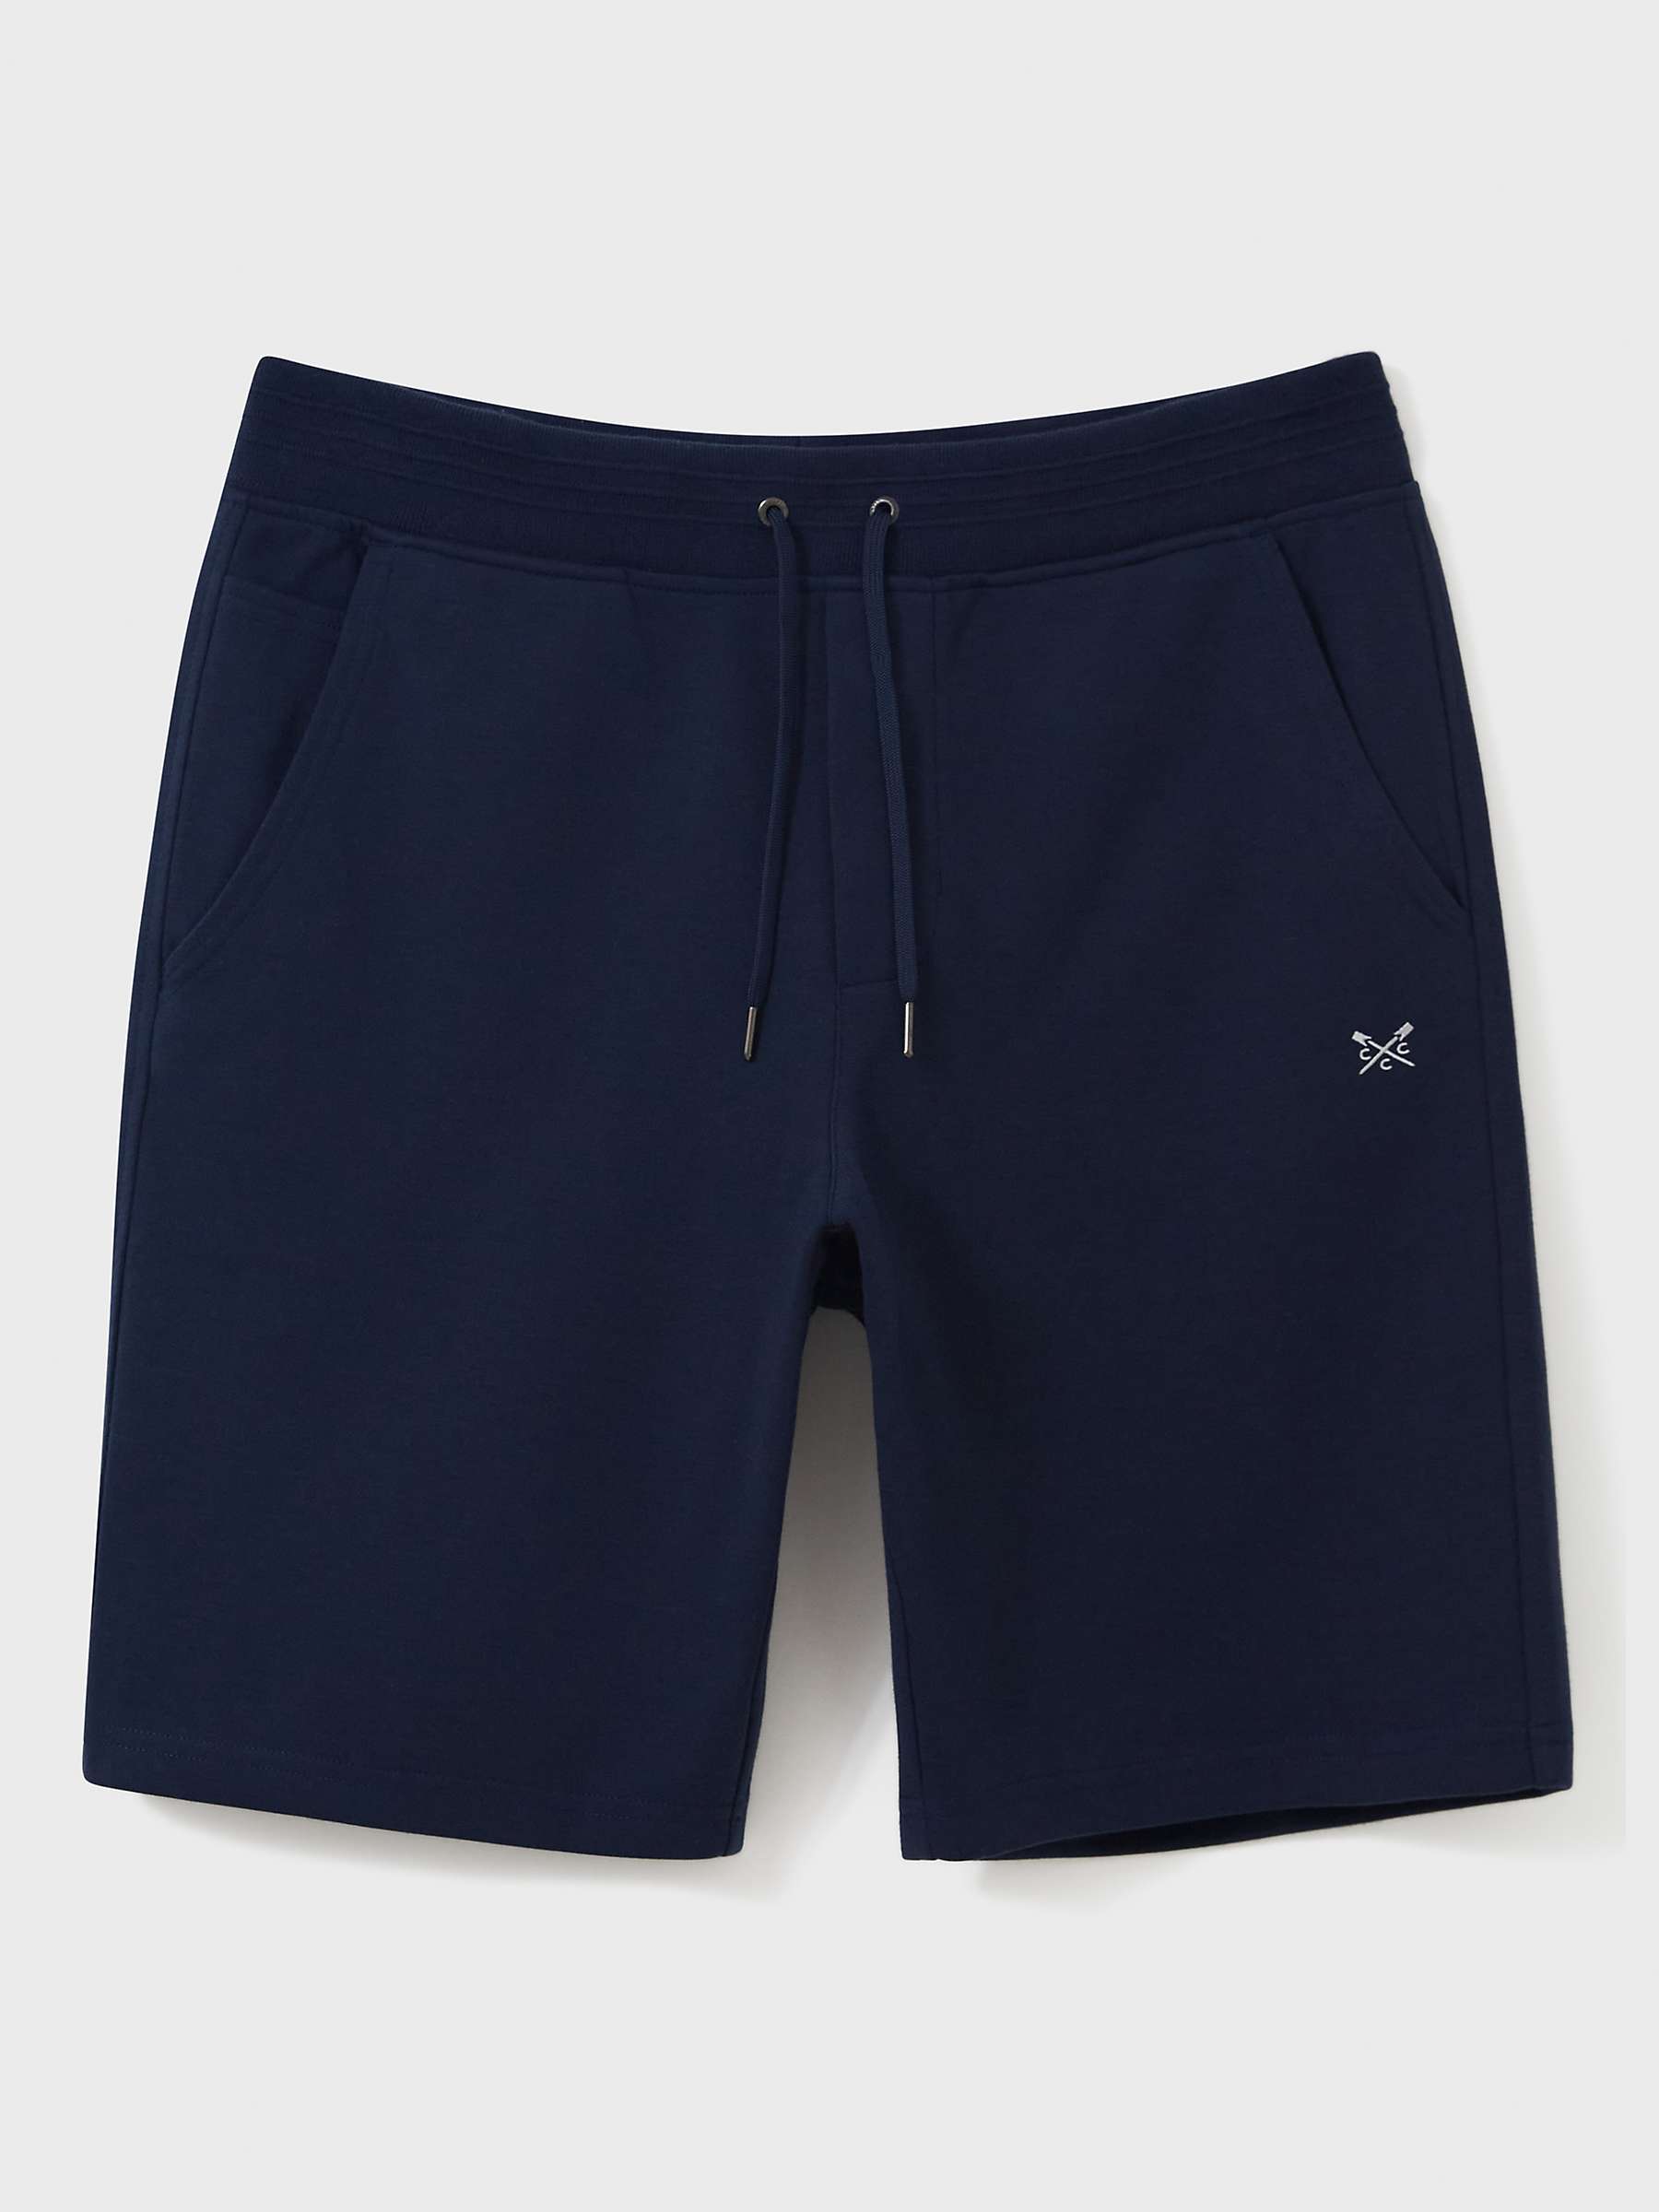 Buy Crew Clothing Fairford Shorts, Navy Online at johnlewis.com